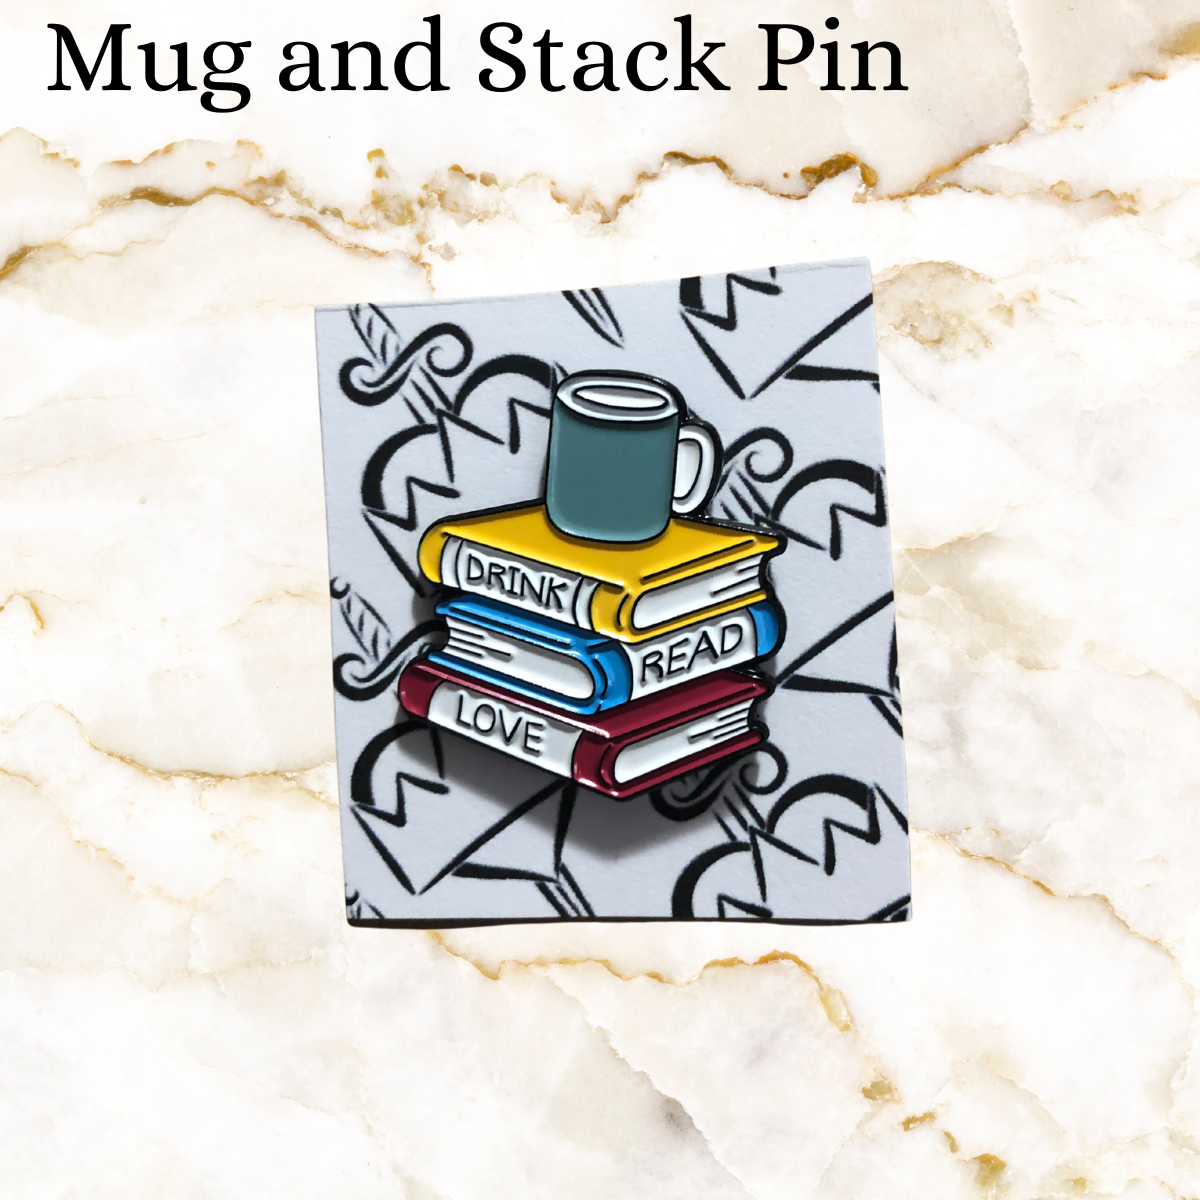 Book pin - stack or 3 books (yellow, blue and red) says Drink Read Love with a green coffee mug on top